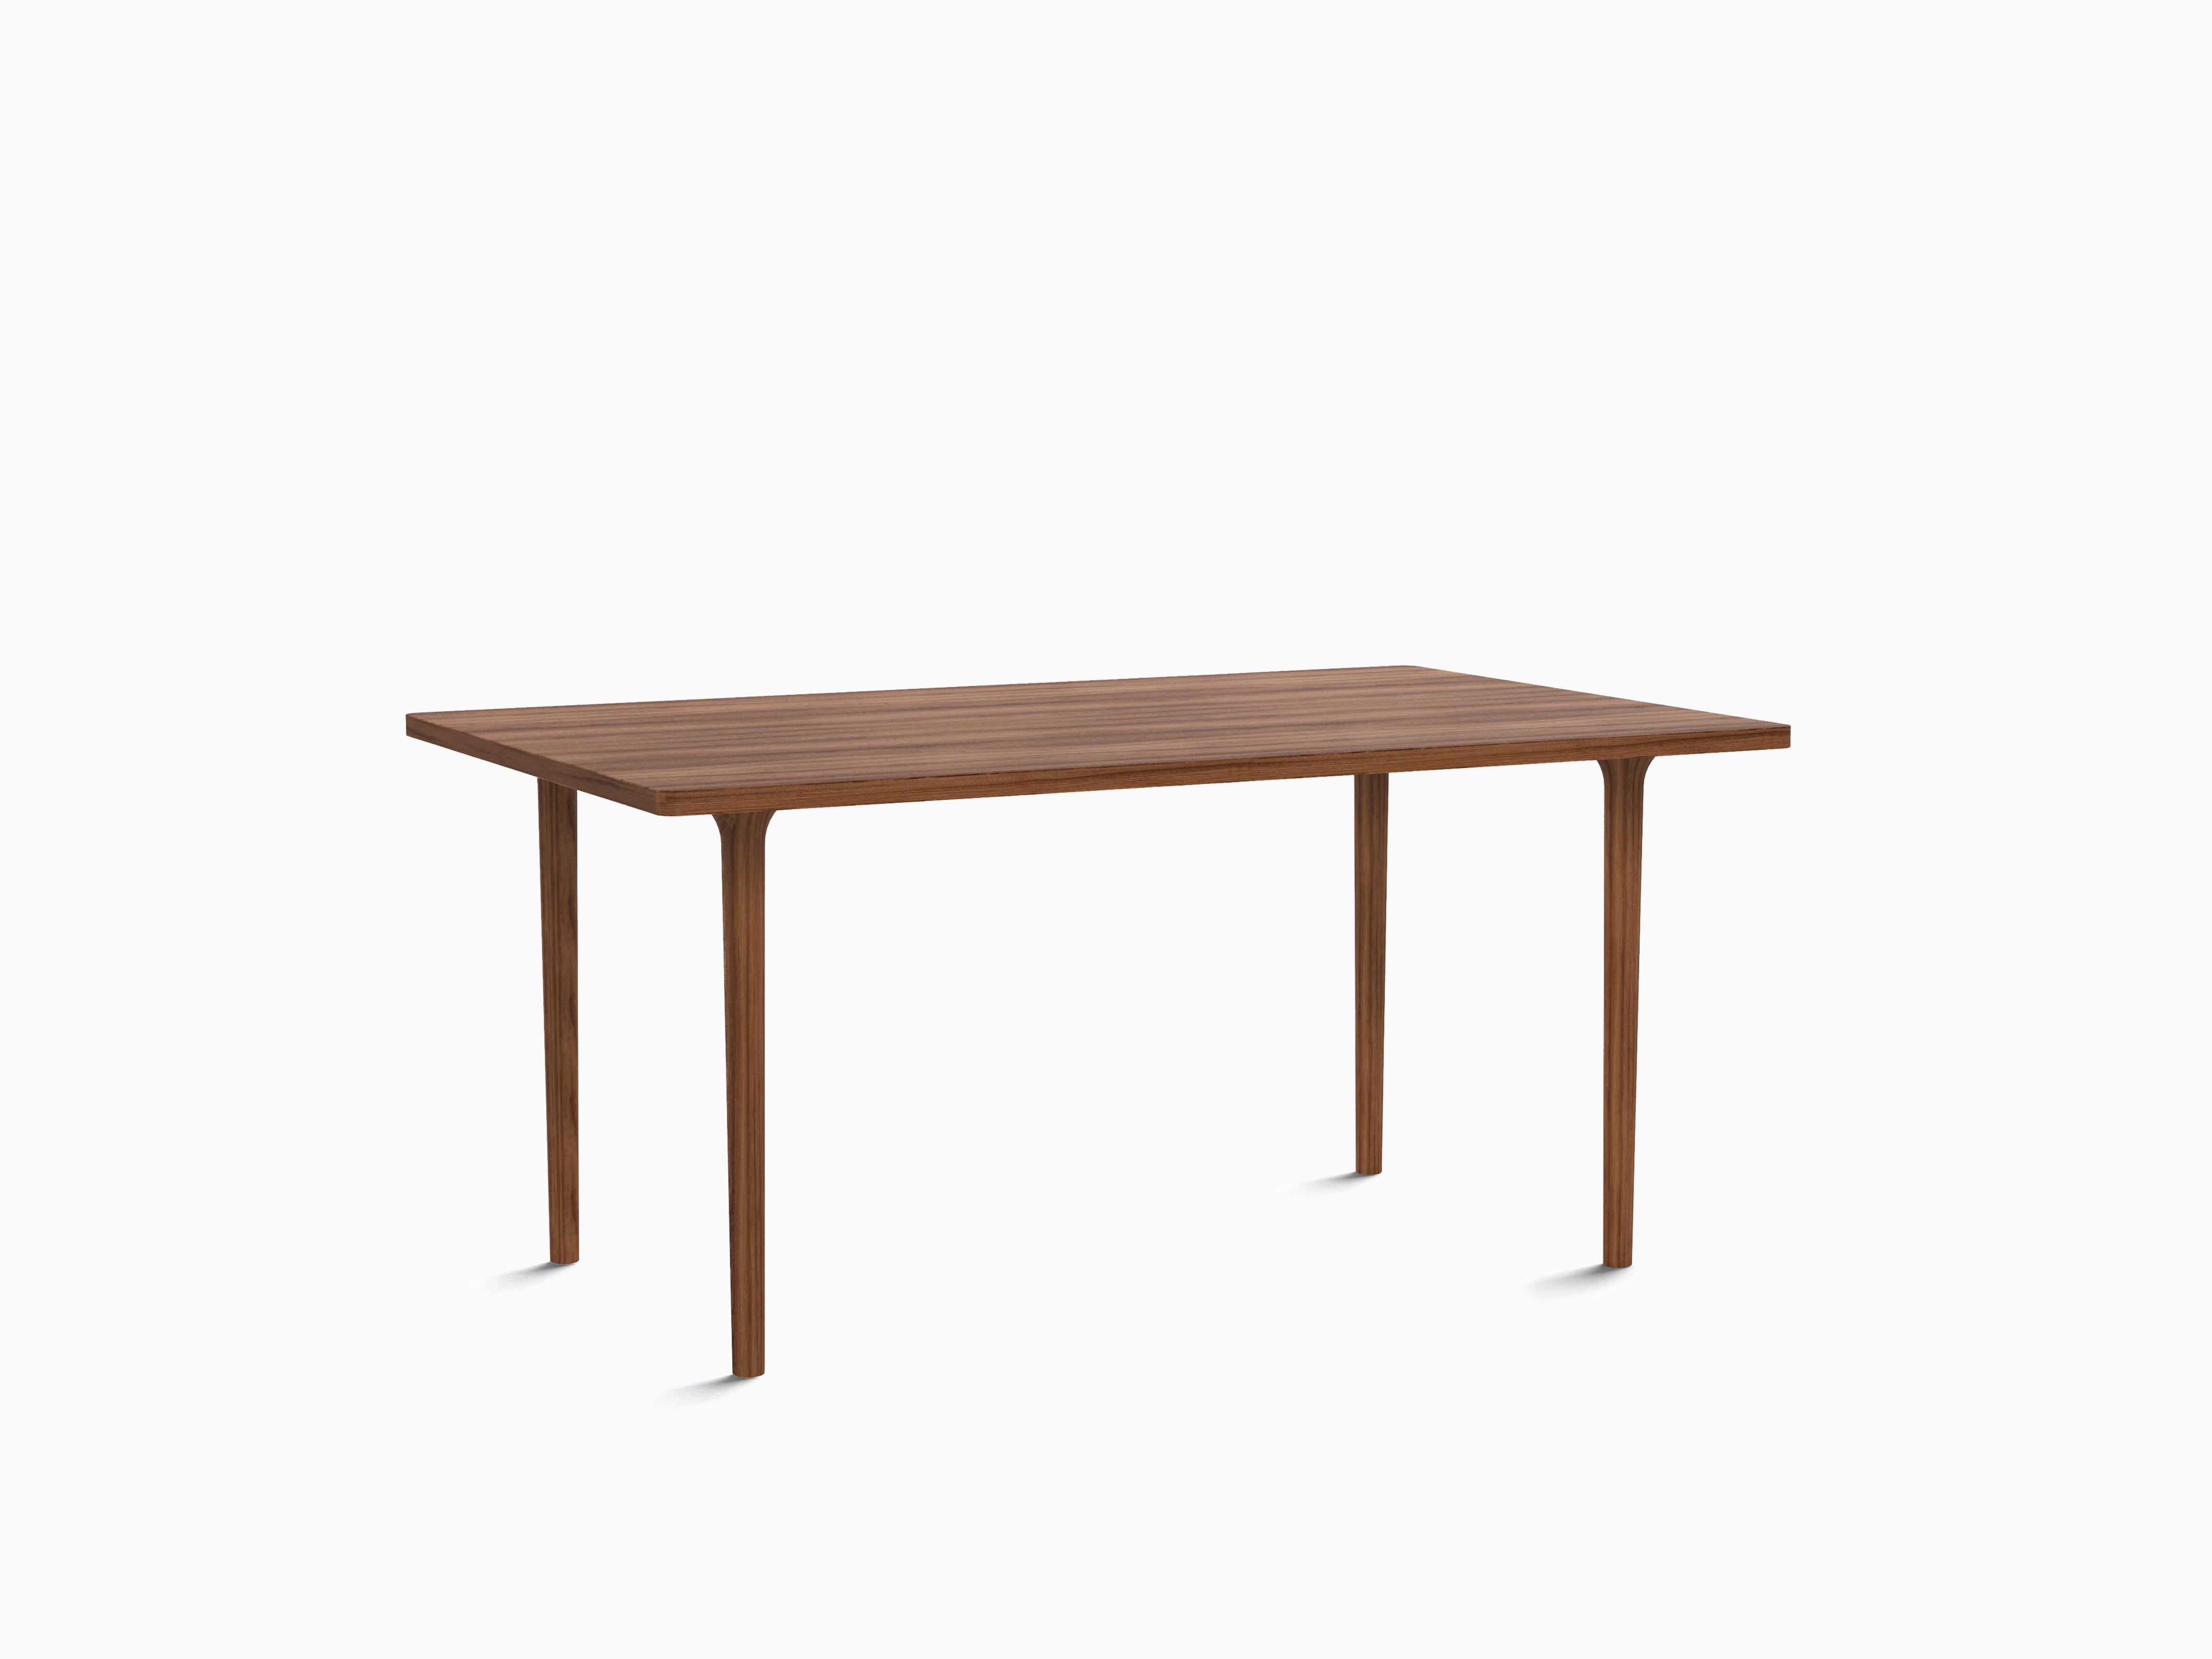 CAST table - A simple and versatile design that can be used with different table tops shapes and sizes – be it round, oval, rectangular or square. It is ideal for a wide range of uses be it at the home, also in an extendible version or at an office